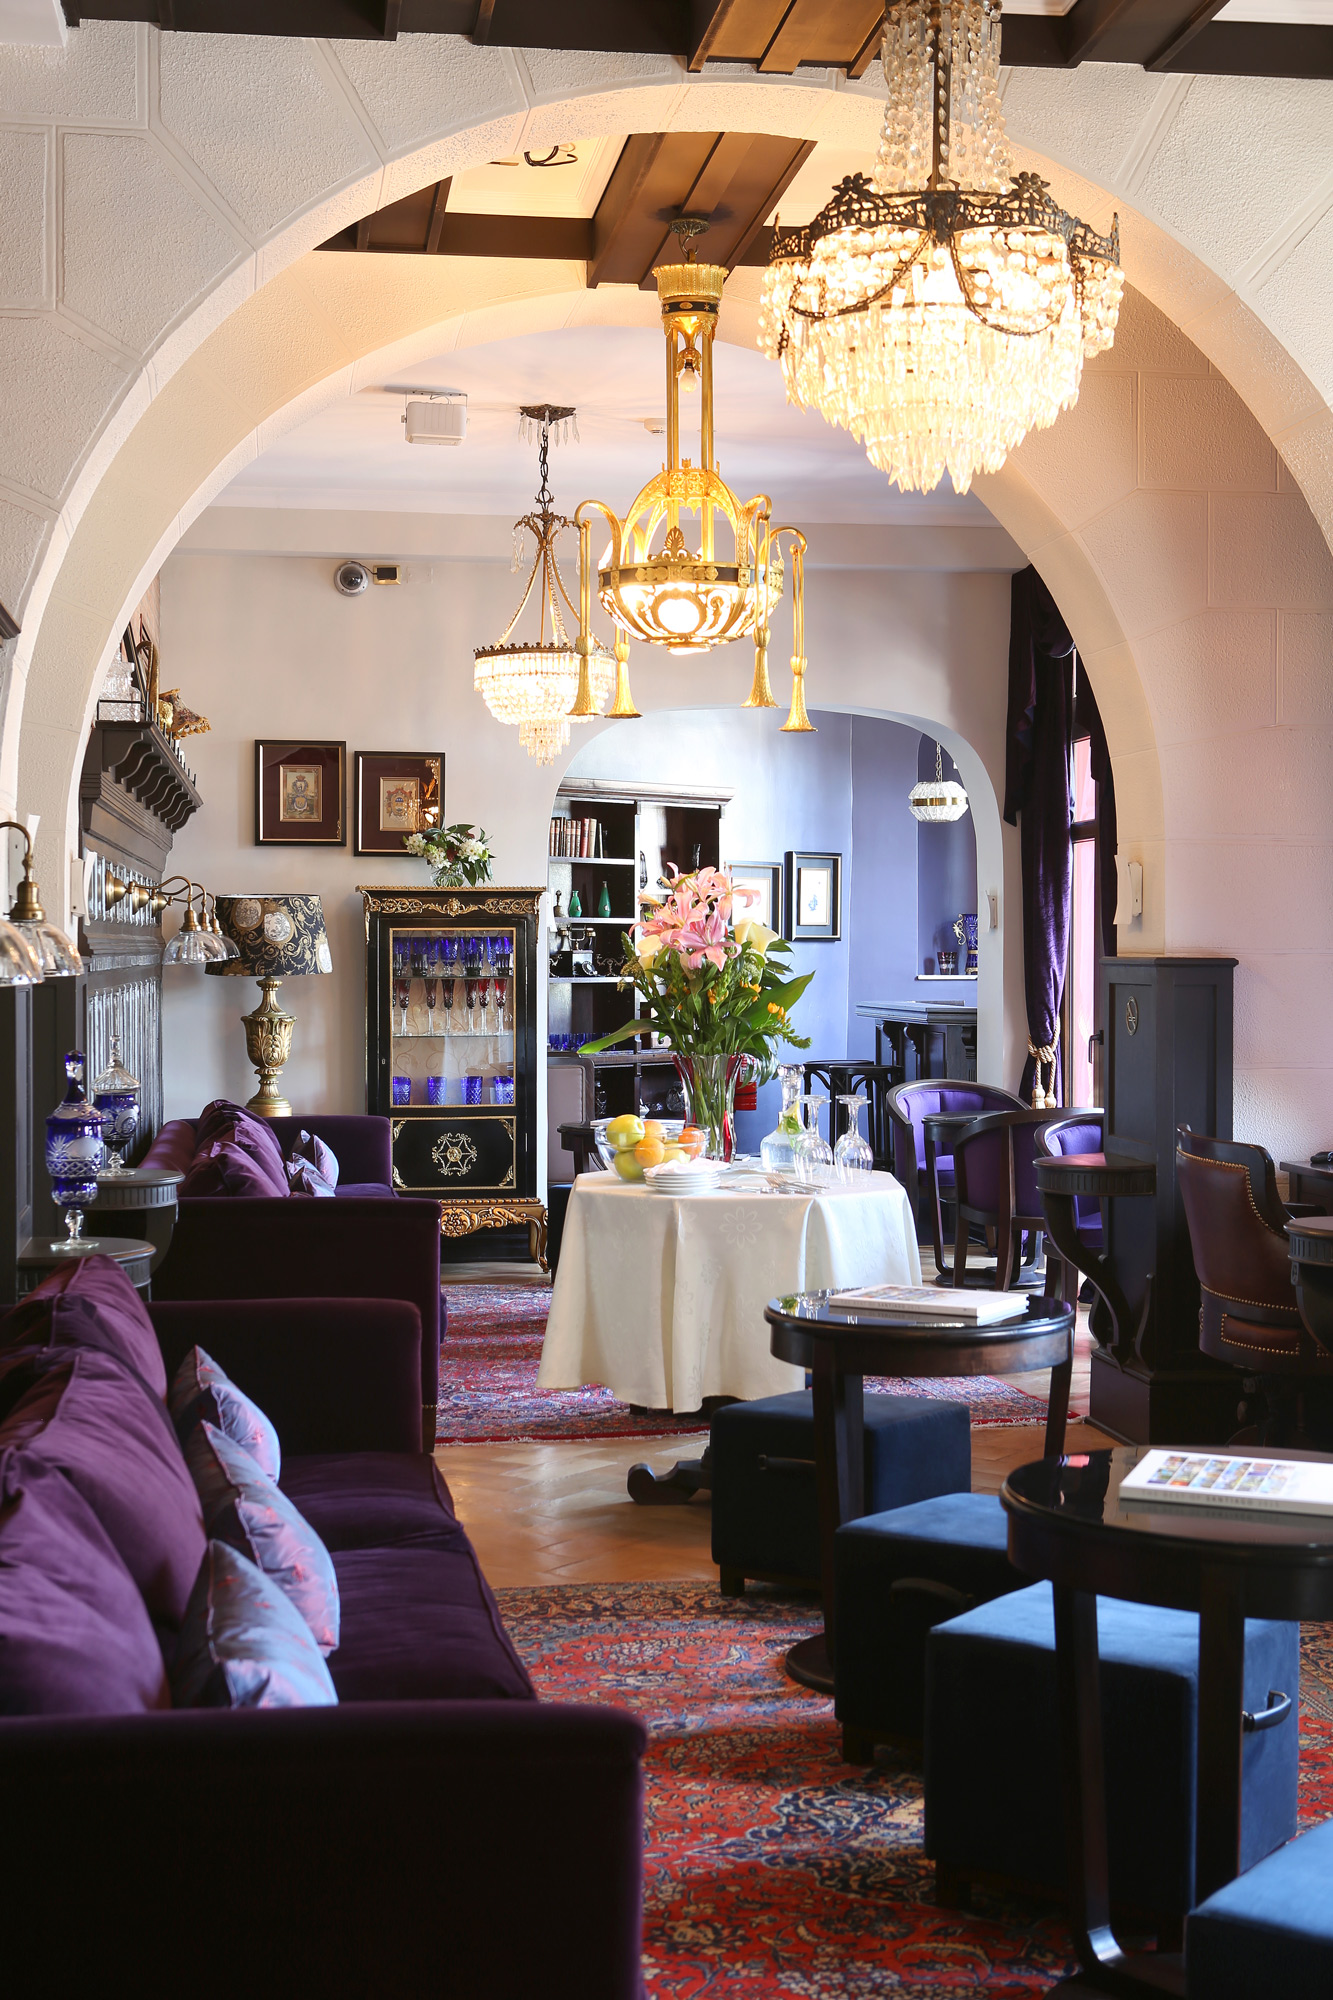 Velvet pillows and antique chandeliers are just part of the appeal at the Castillo Rojo lounge.